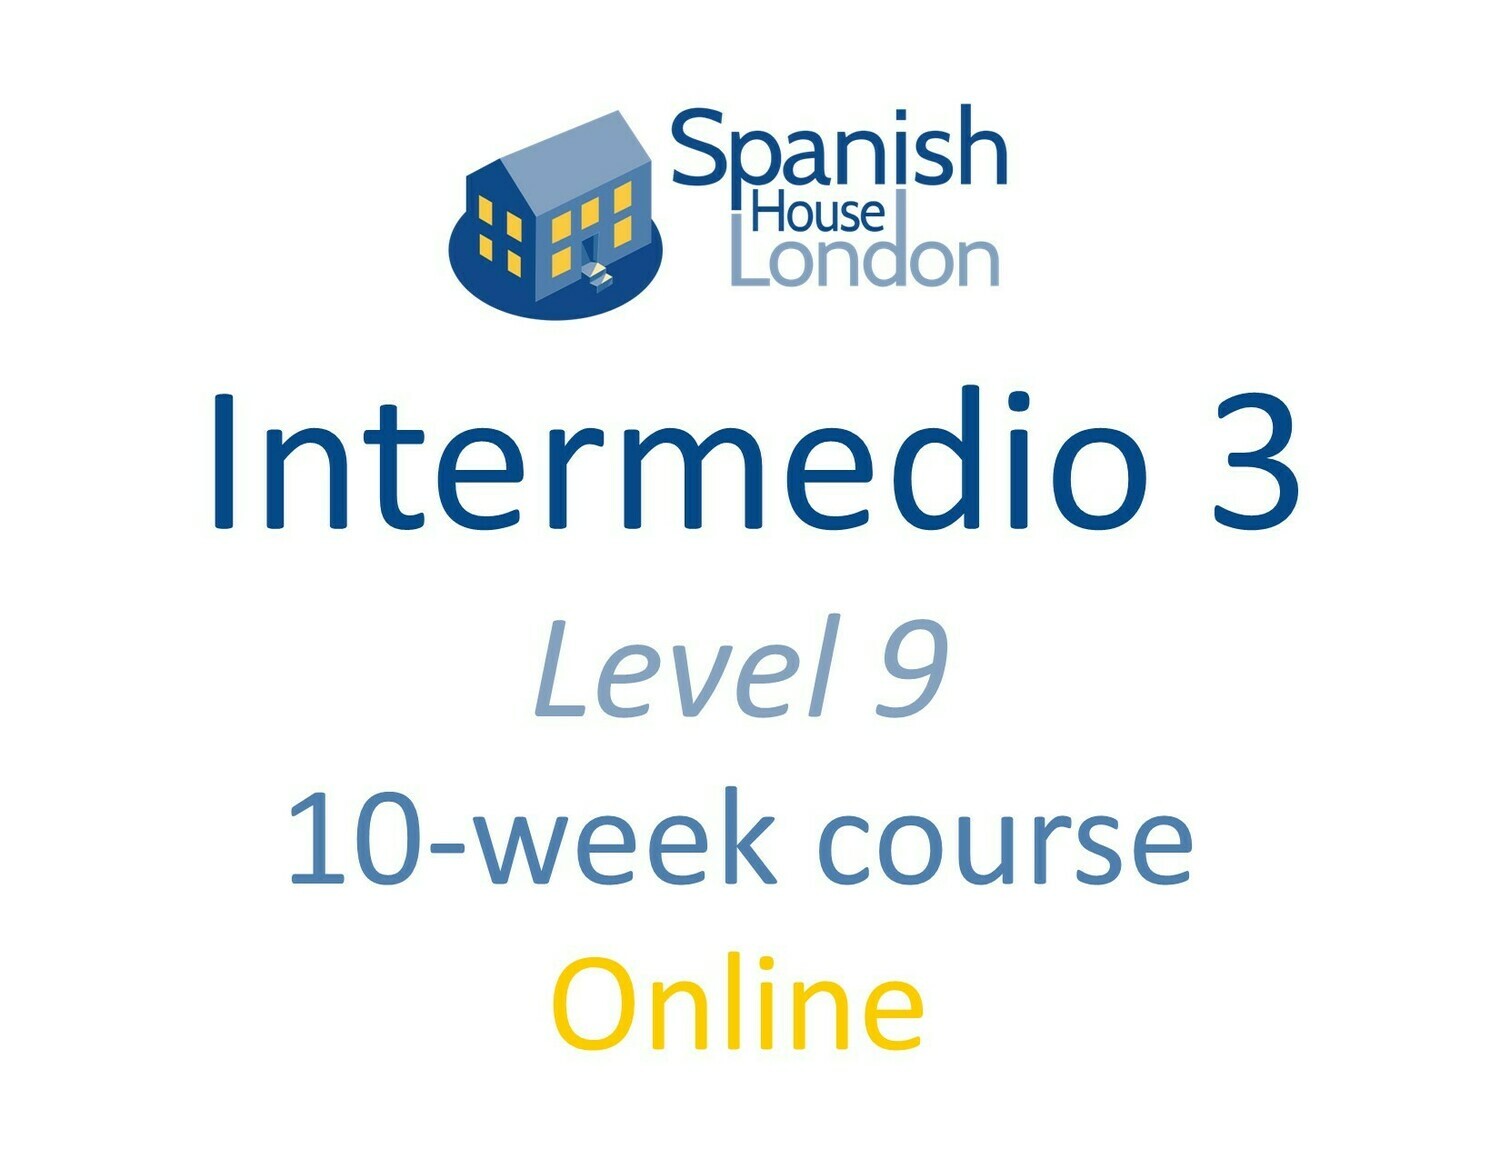 Intermedio 3 Course starting on 14th February at 7.30pm